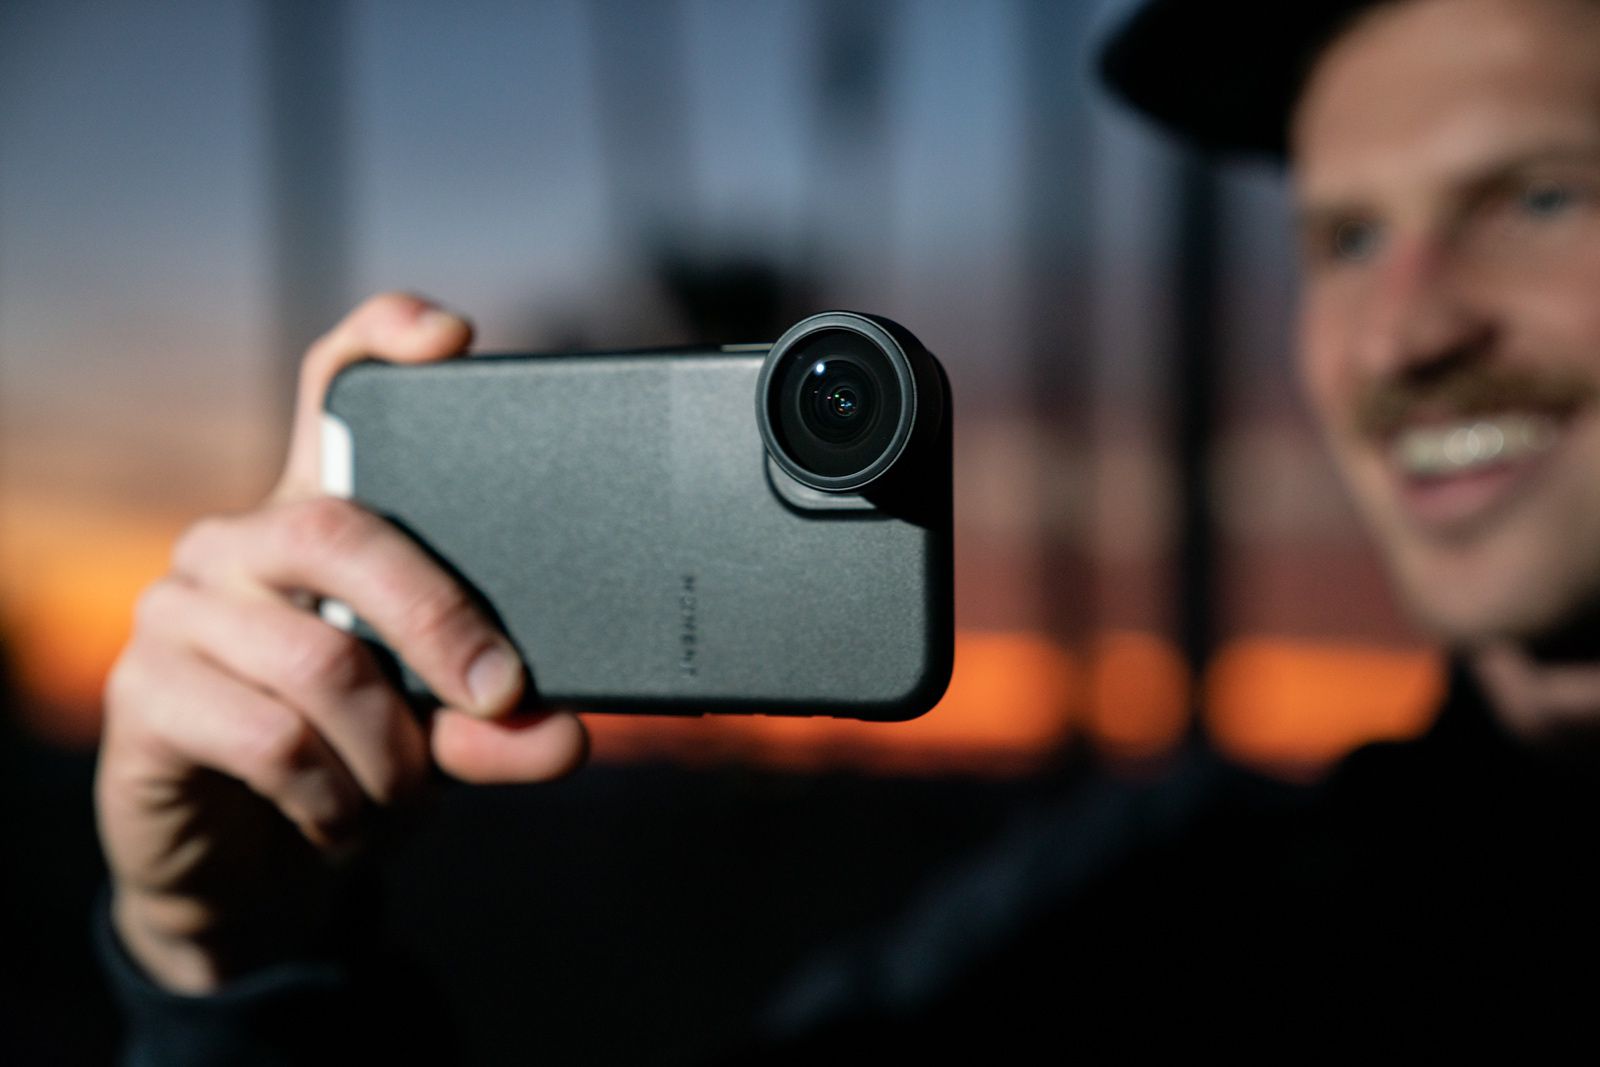 Moment Debuts New 14mm Fisheye Lens for iPhone. Promises